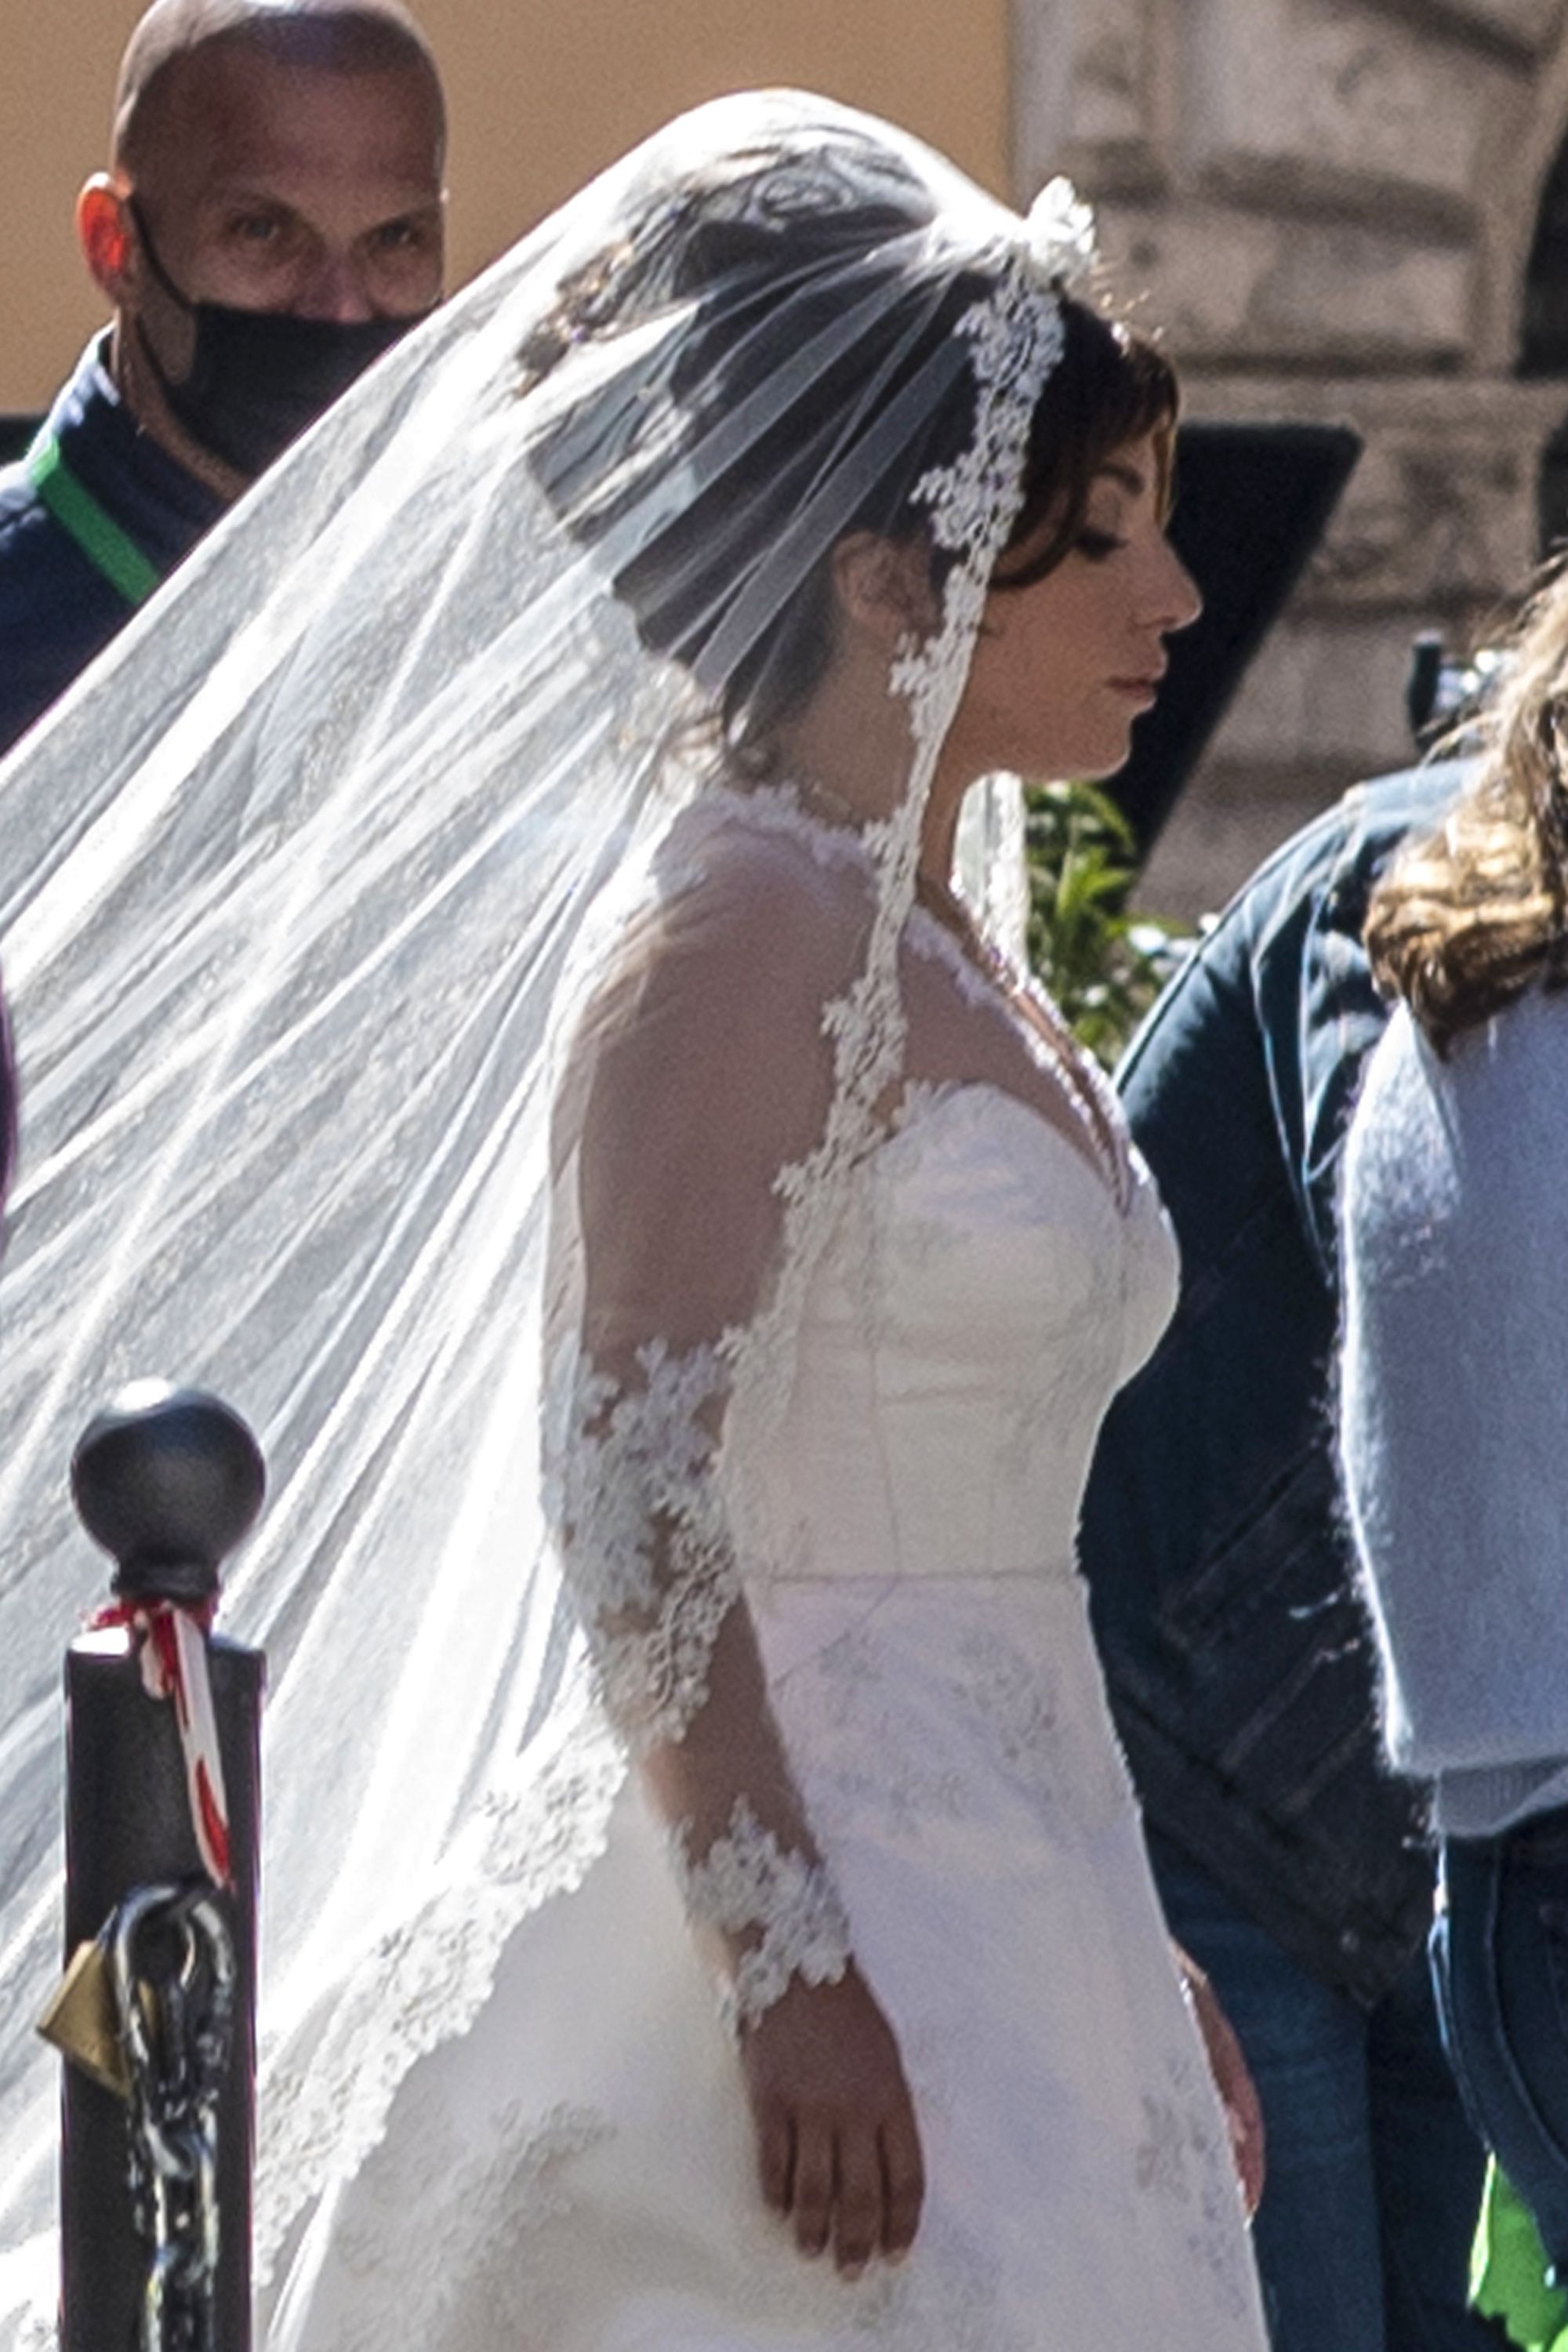 Lady Gaga Wore Two Wedding Dresses on the House of Gucci Set